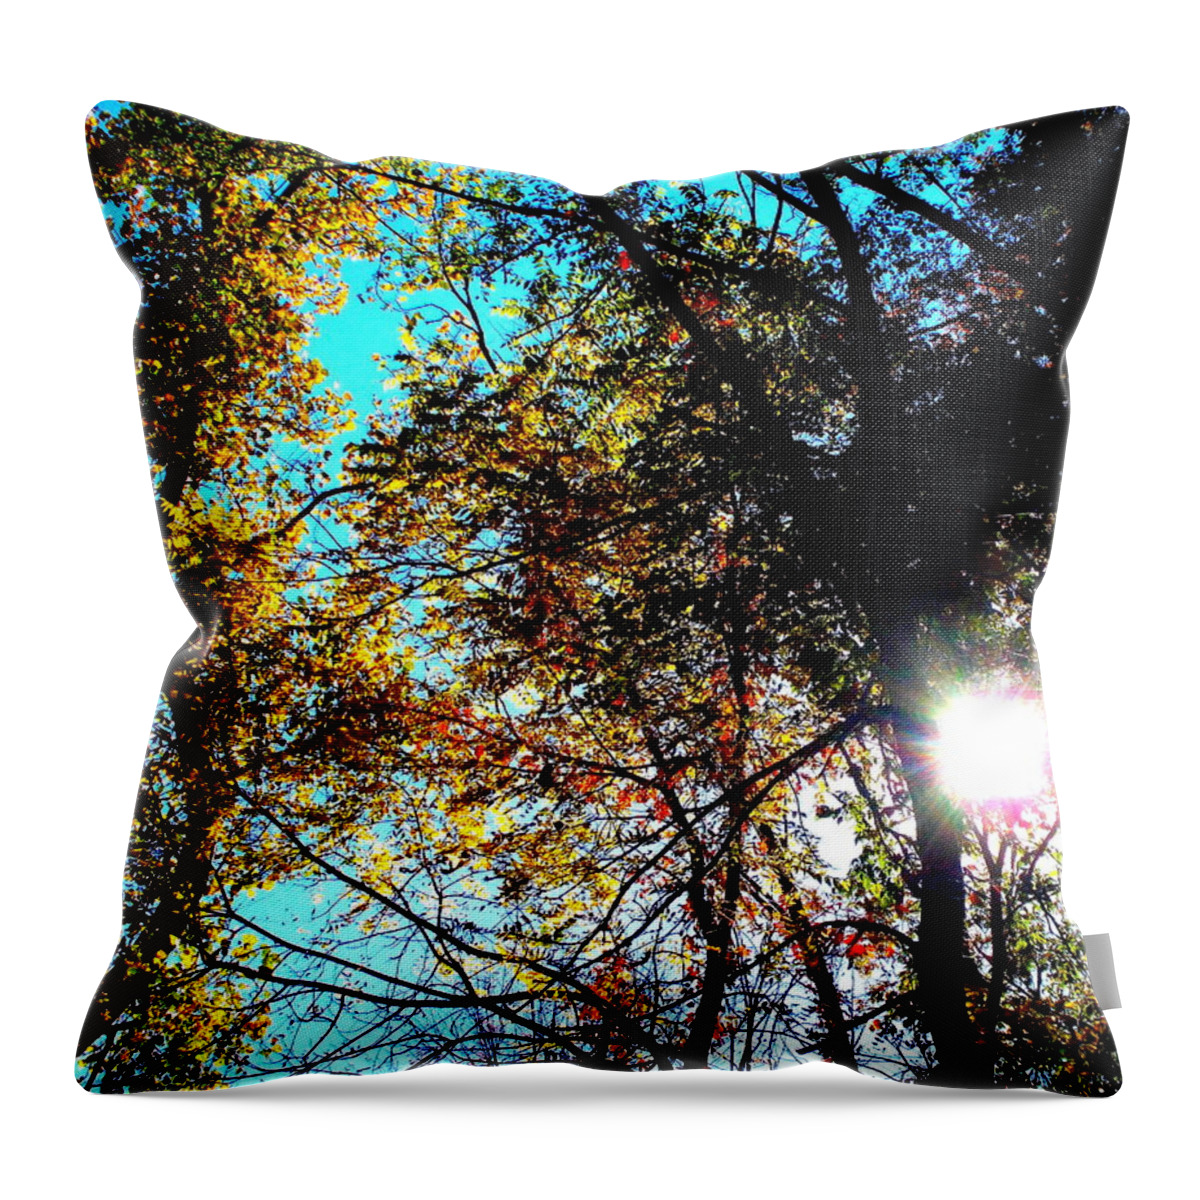 Falling Into Color Throw Pillow featuring the photograph Falling into Color by Darren Robinson